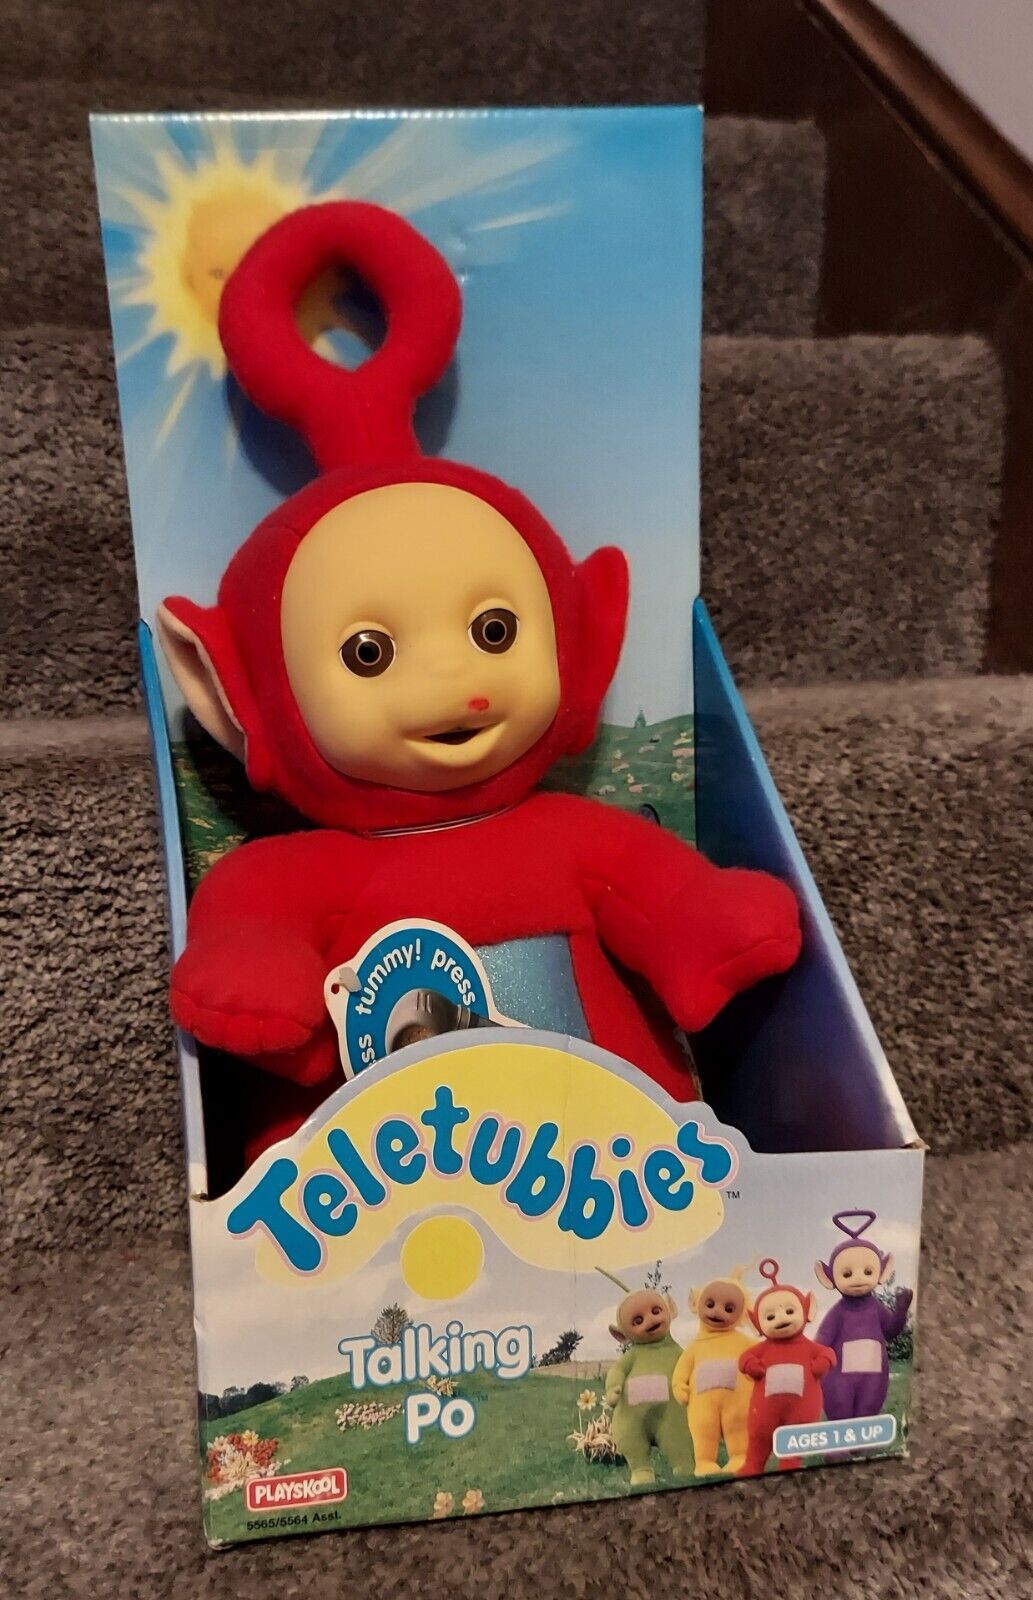 1998 Playskool TELETUBBIES TALKING PO Doll pulled from shelves TESTED & WORKING